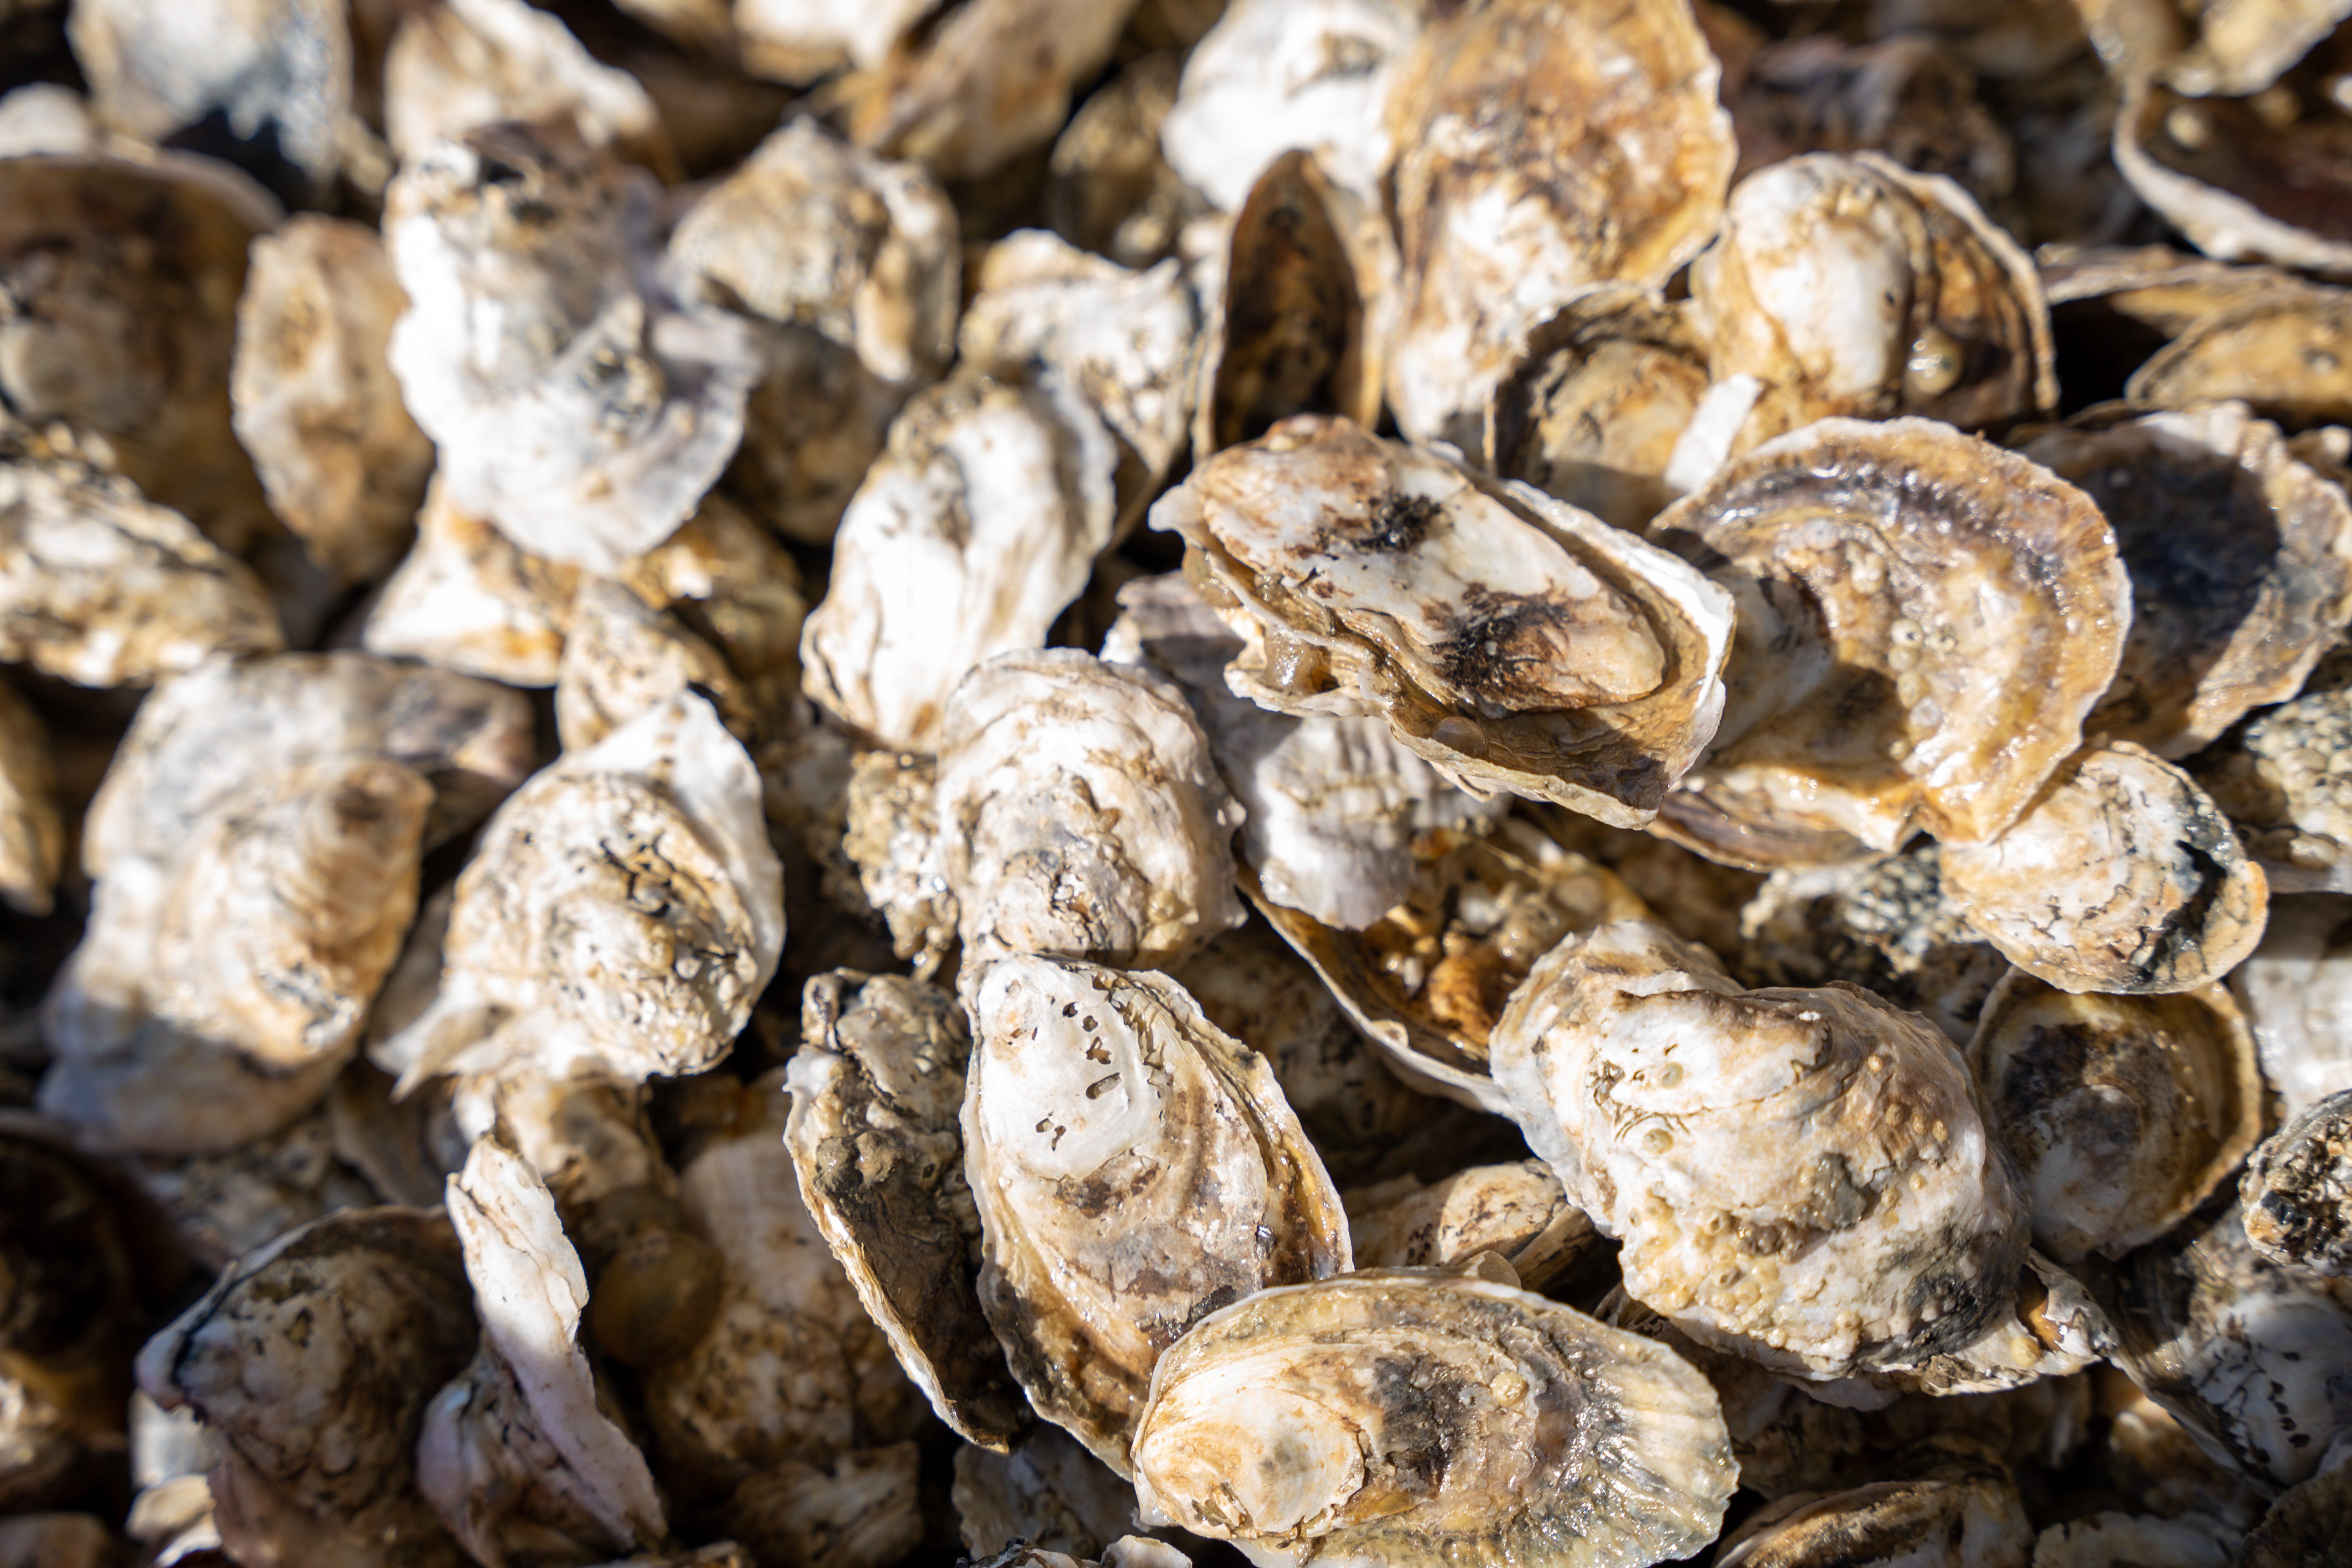 A photograph of oysters